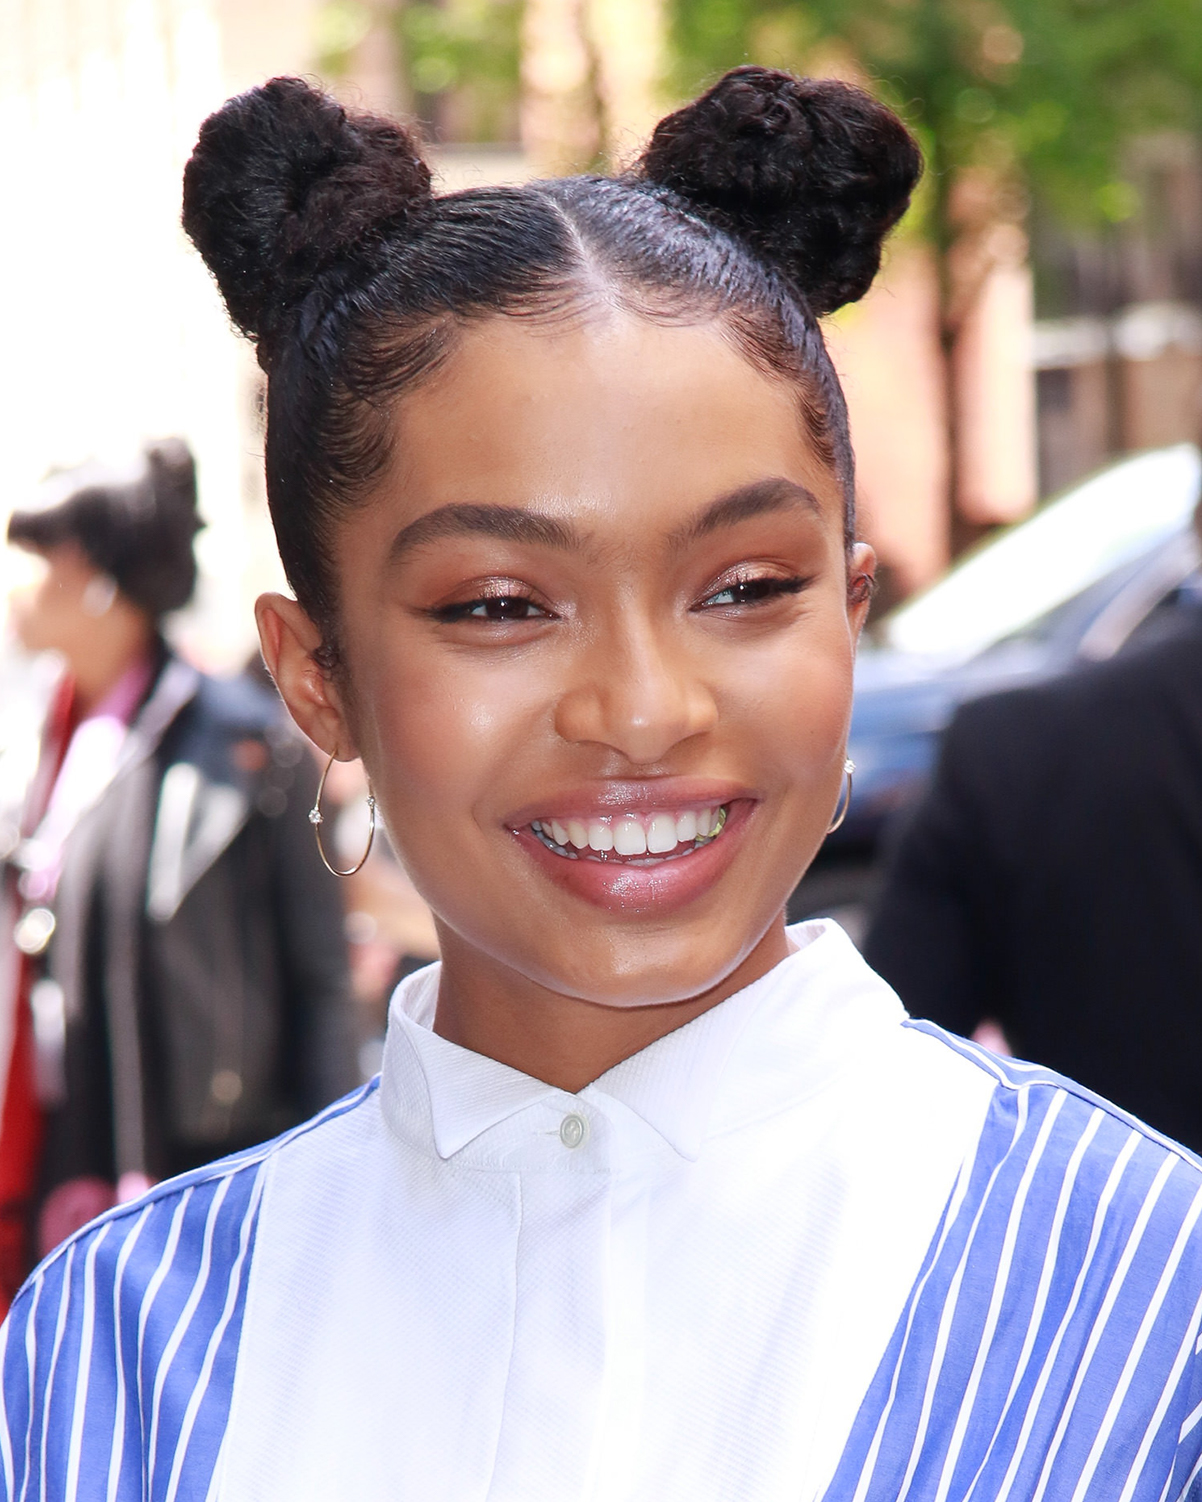 The 21 Chicest Braided Hairstyles for Short Hair of All Time | Who What Wear